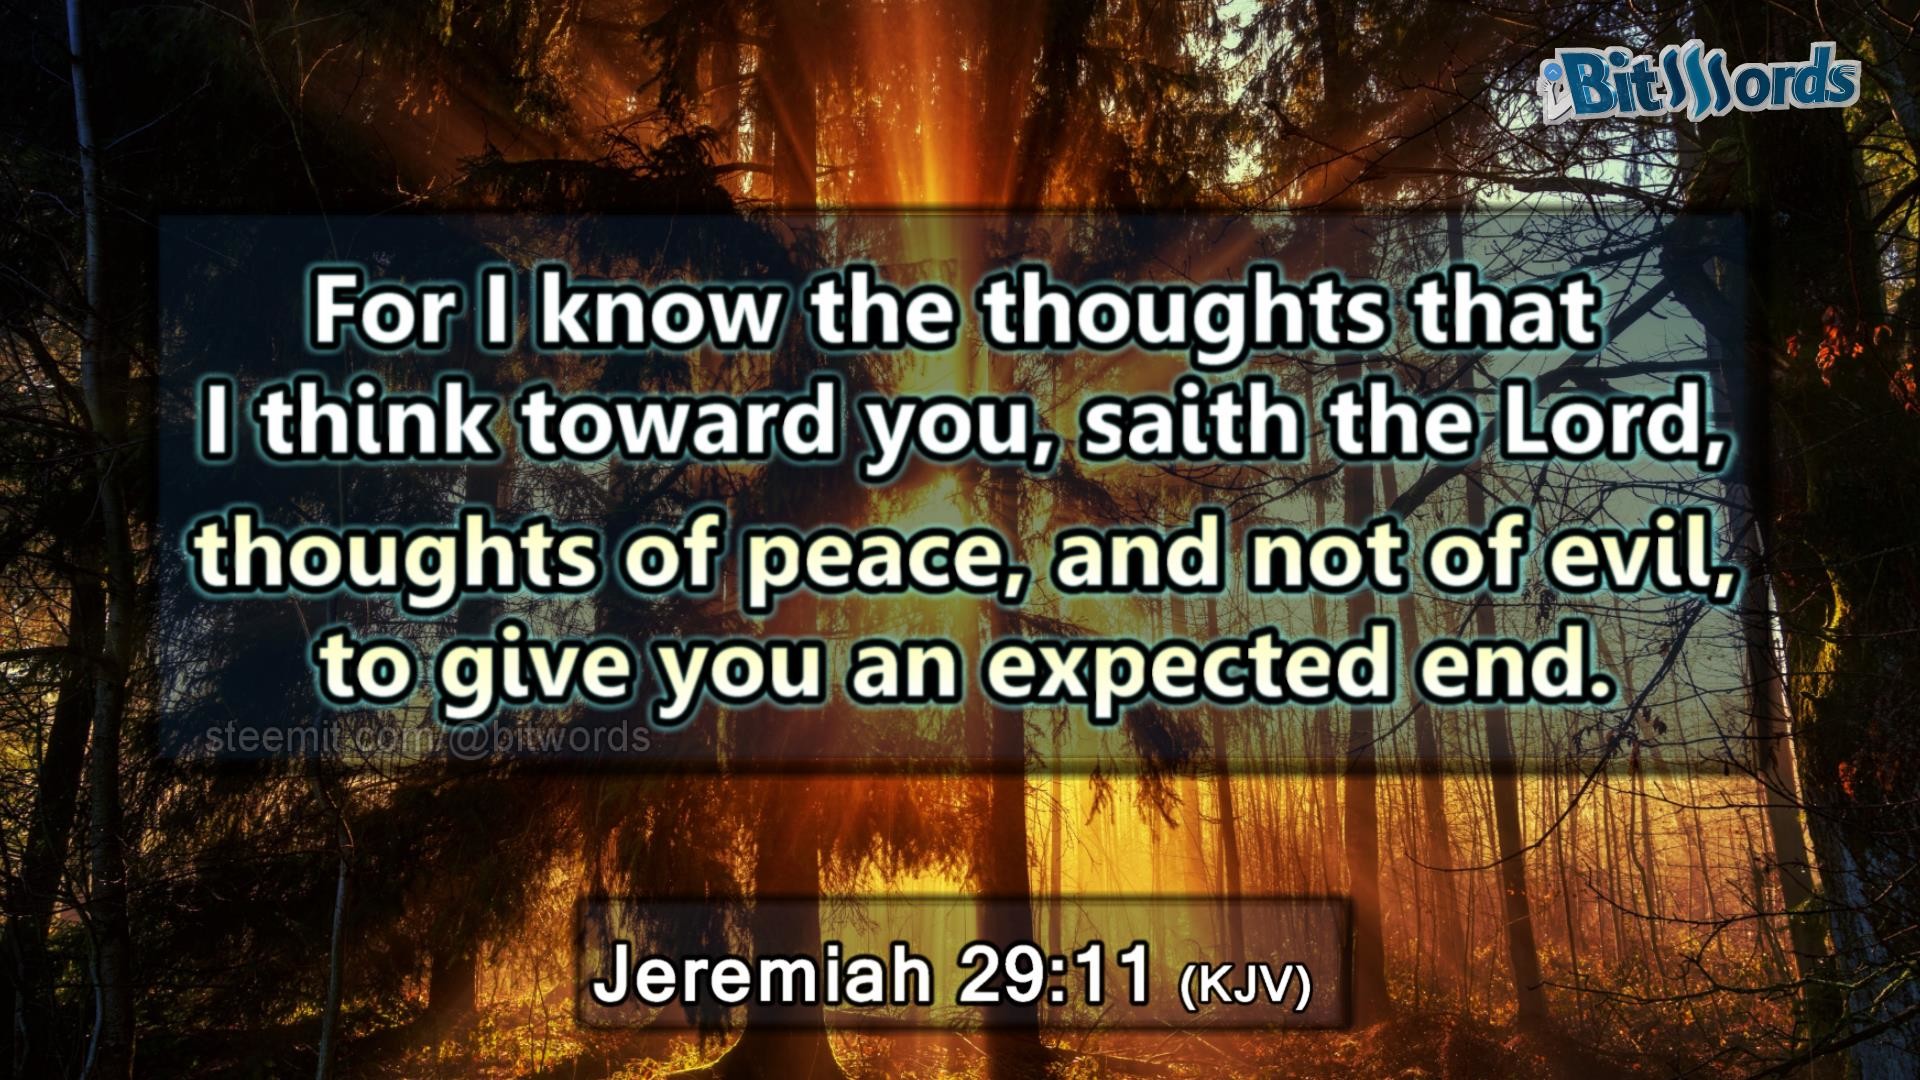 1920x1080 Jeremiah 29:11 (KJV). bitwords steemit bible verse of the day For I know  the thoughts that I think toward